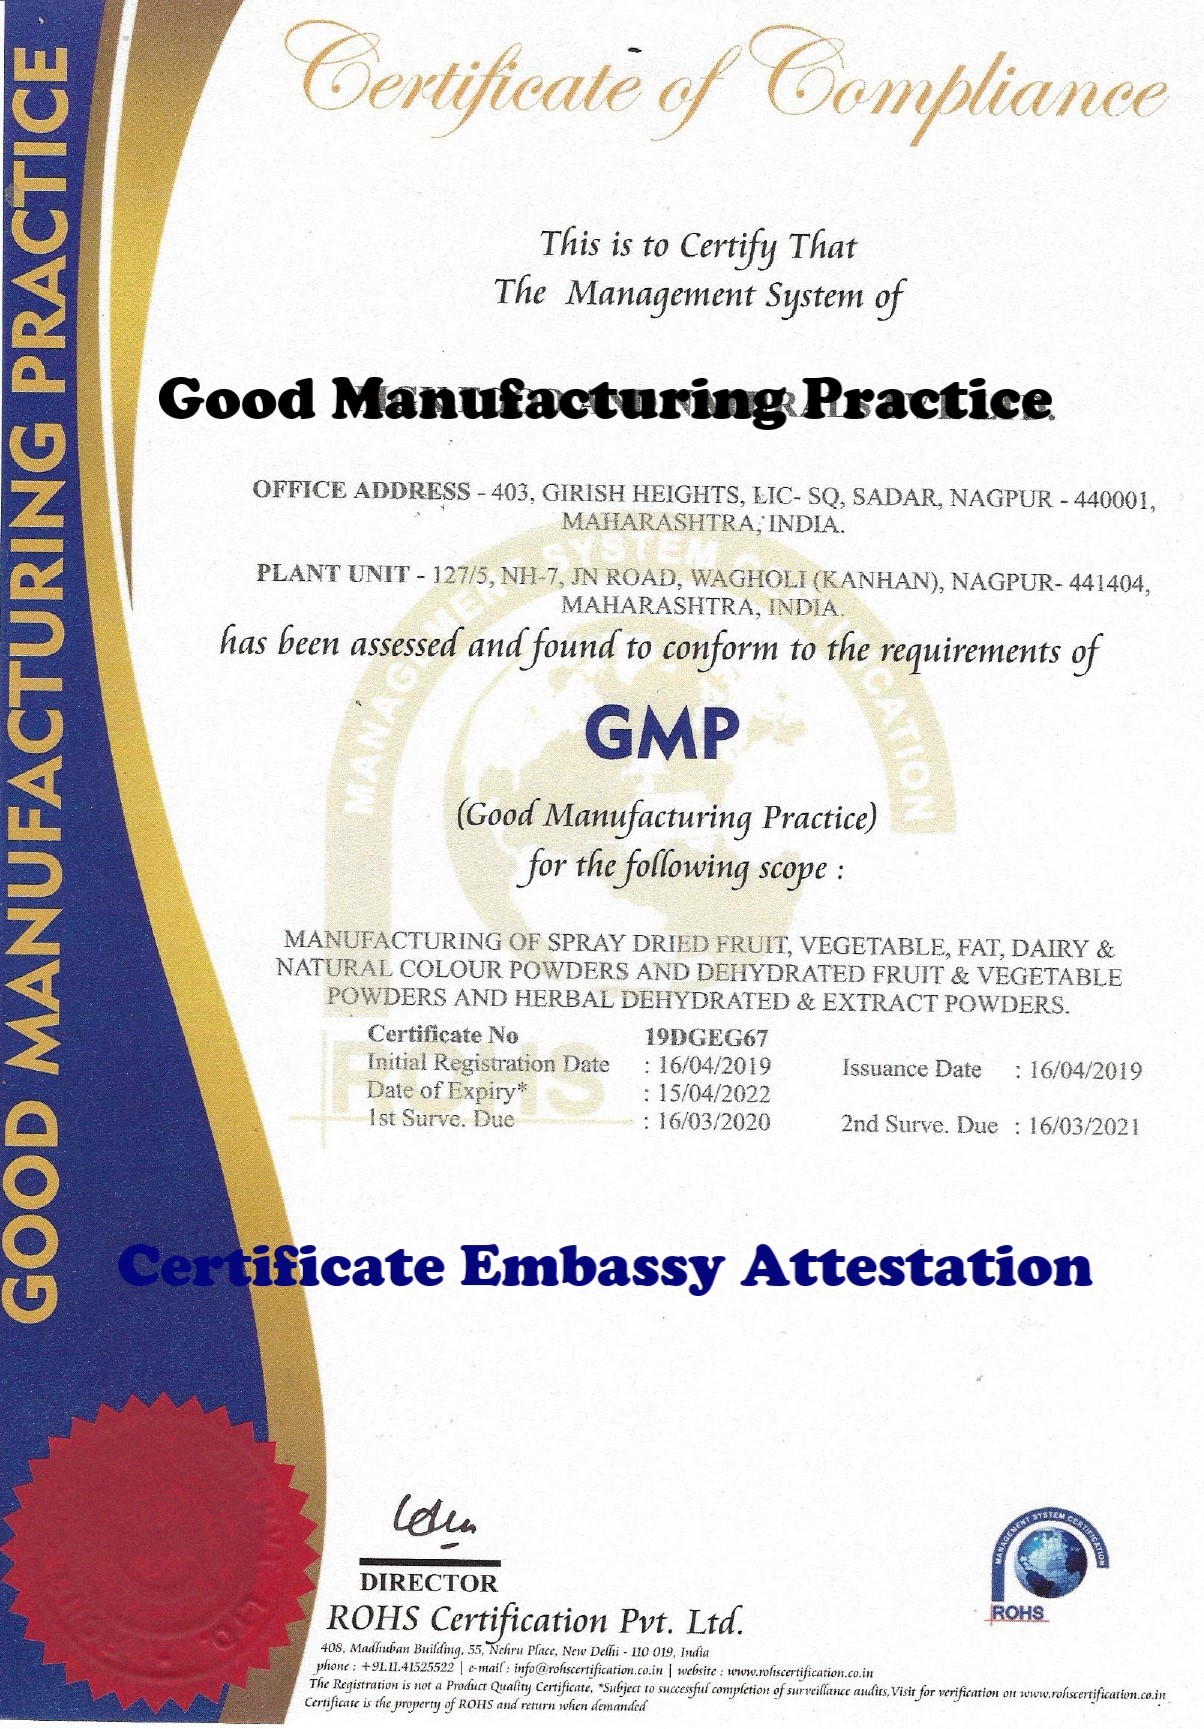 GMP Certificate Attestation from Philippines Embassy